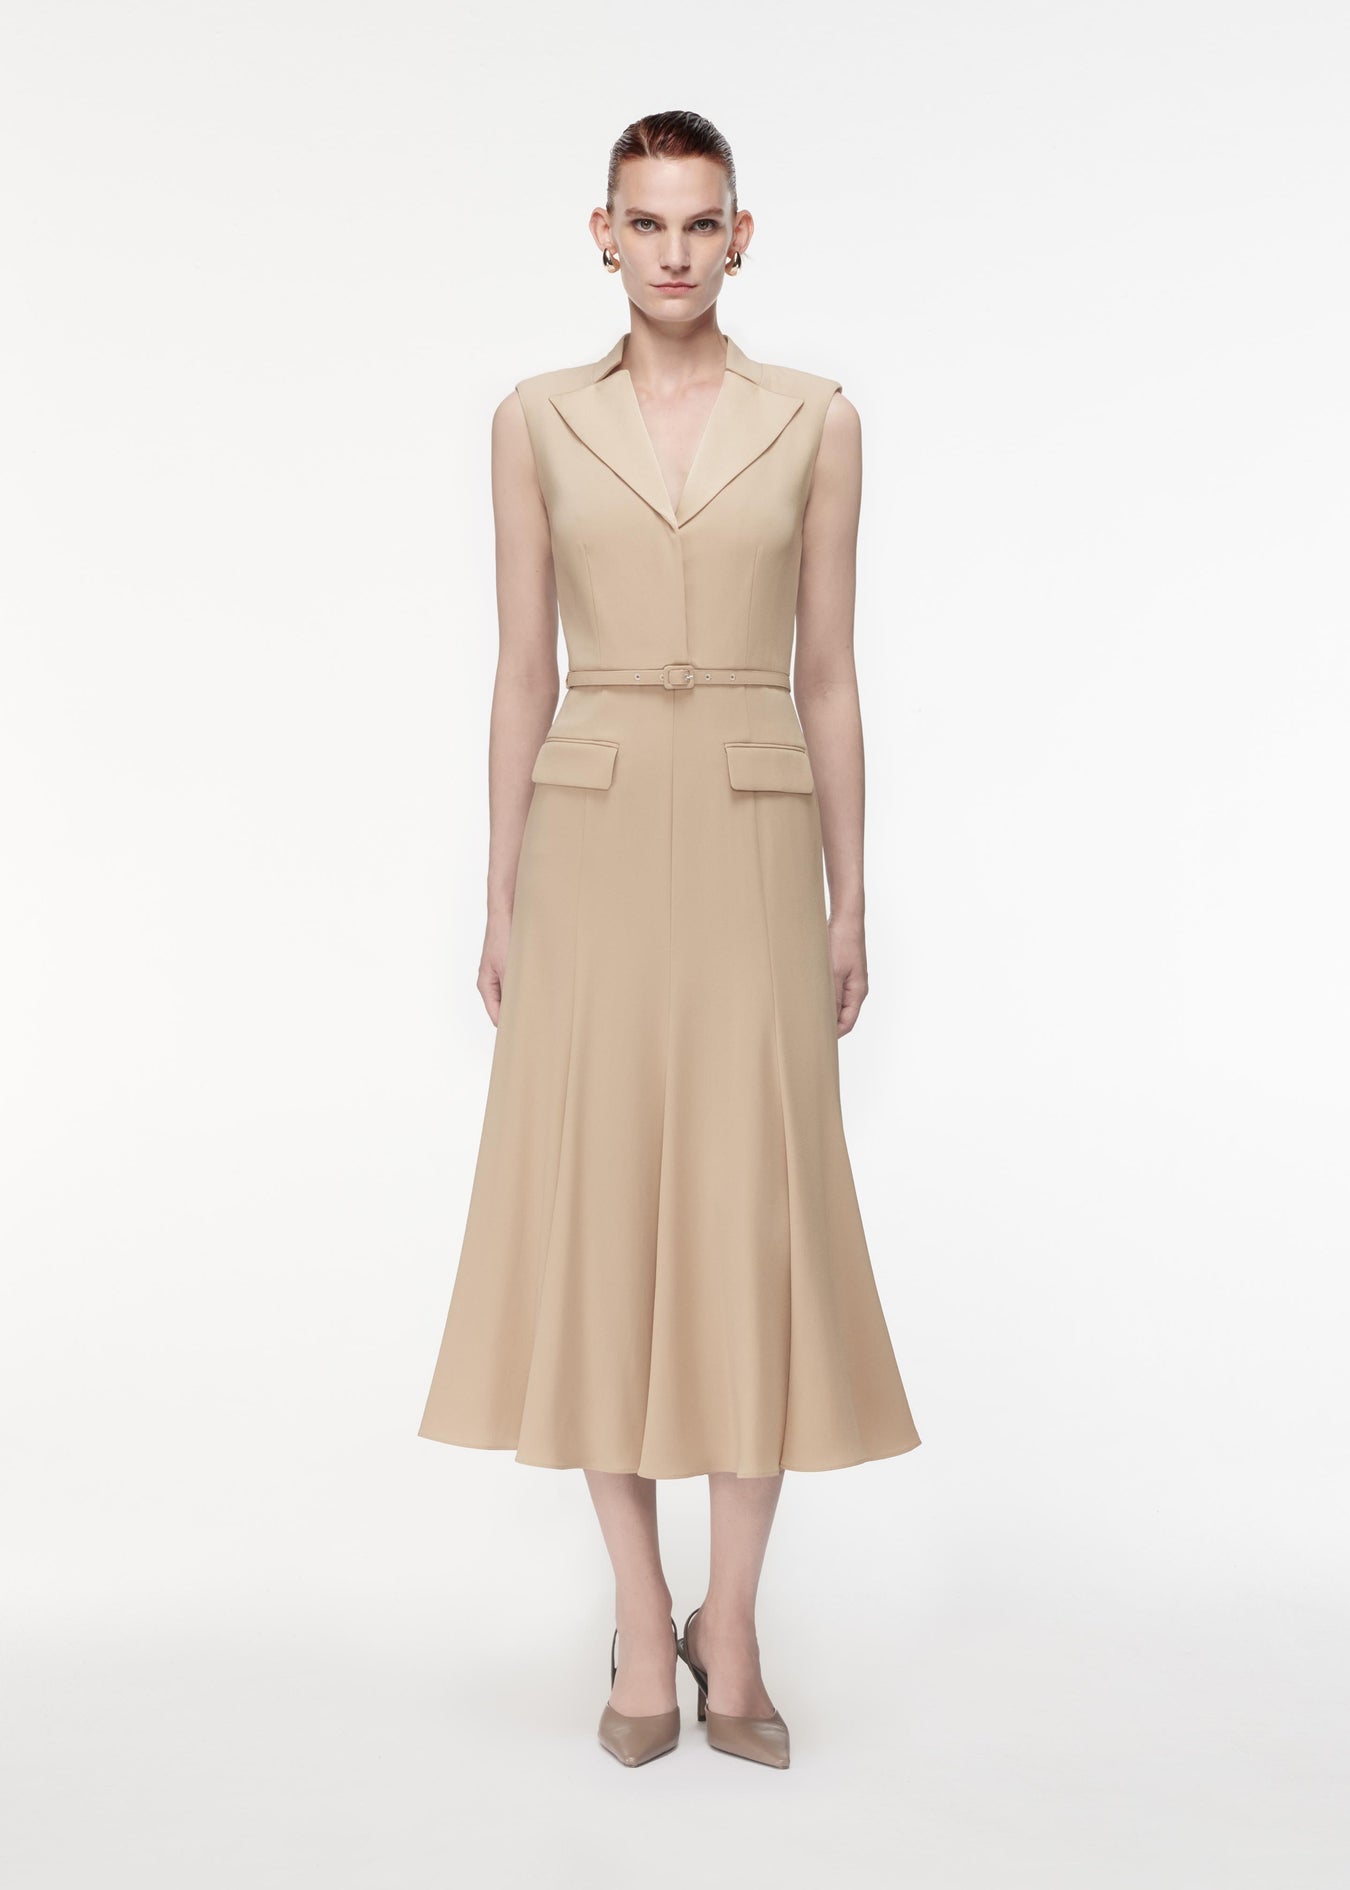 A photograph of a woman wearing a Satin Crepe Midi Dress in Taupe